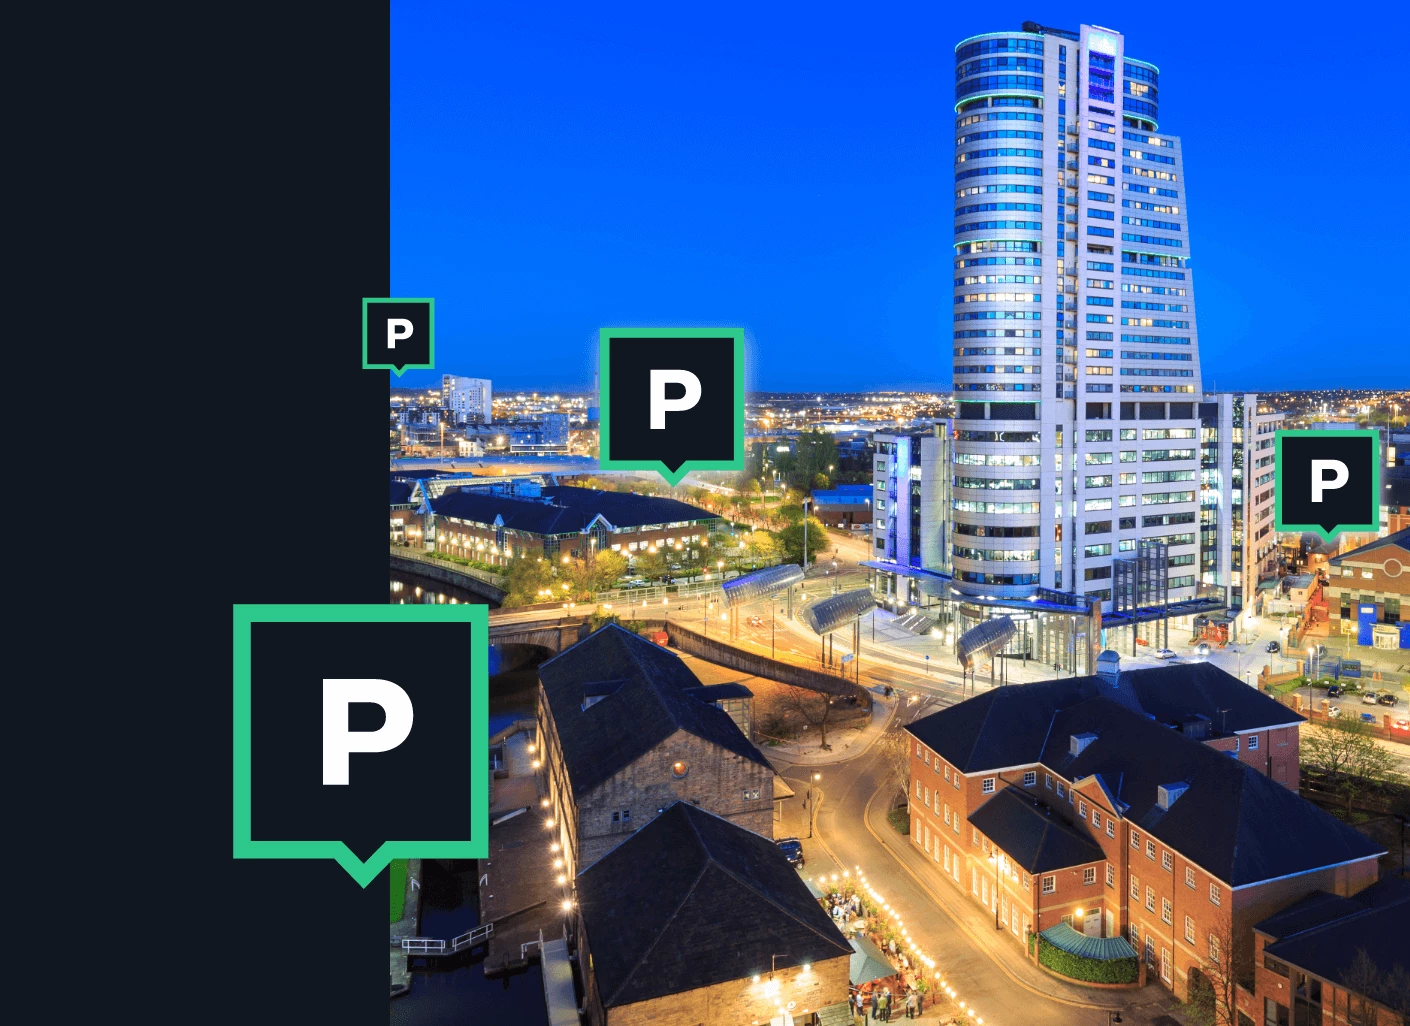 Image of the city and floating Parking signs